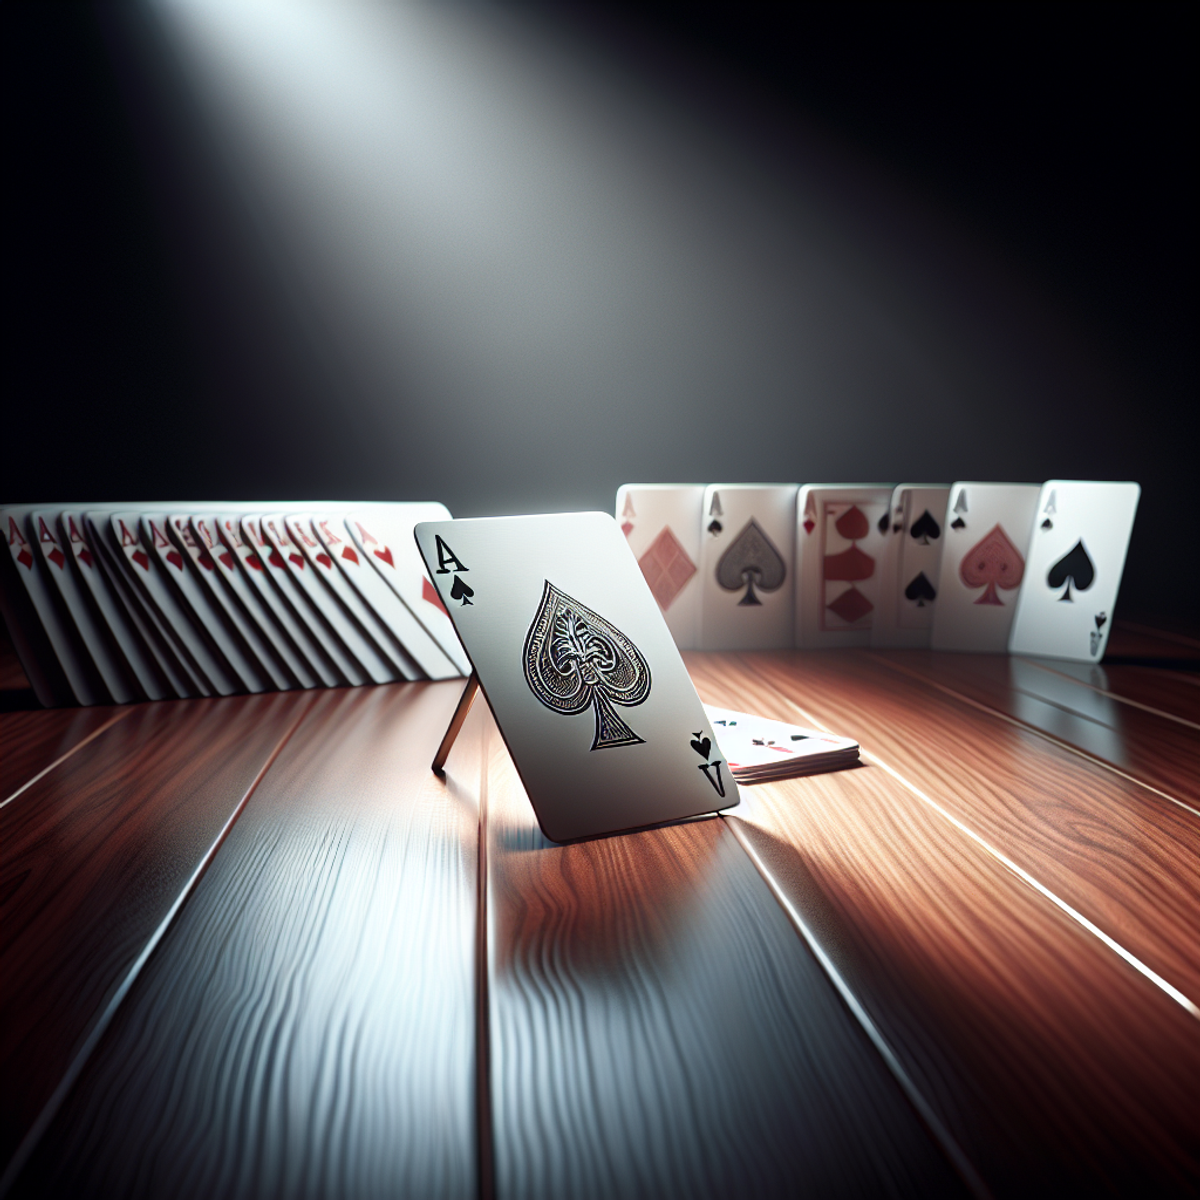 Intricately designed playing cards on a wooden table with the Ace of Spades under a spotlight.